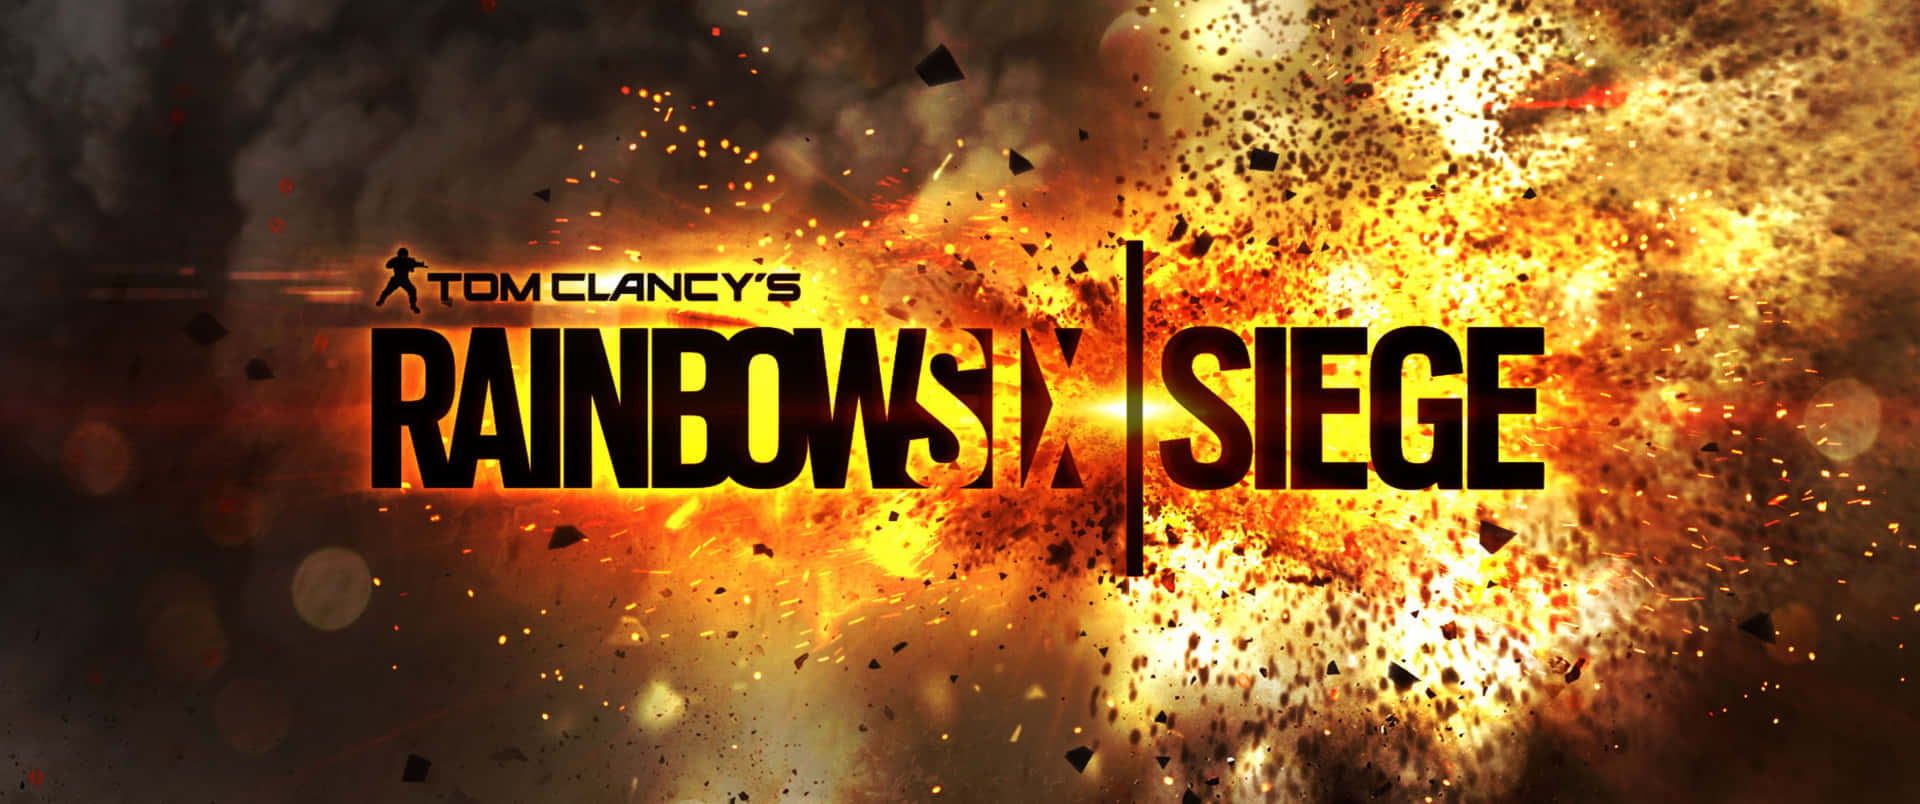 Battle the enemy in Rainbow Six Siege with a 3440x1440p resolution.